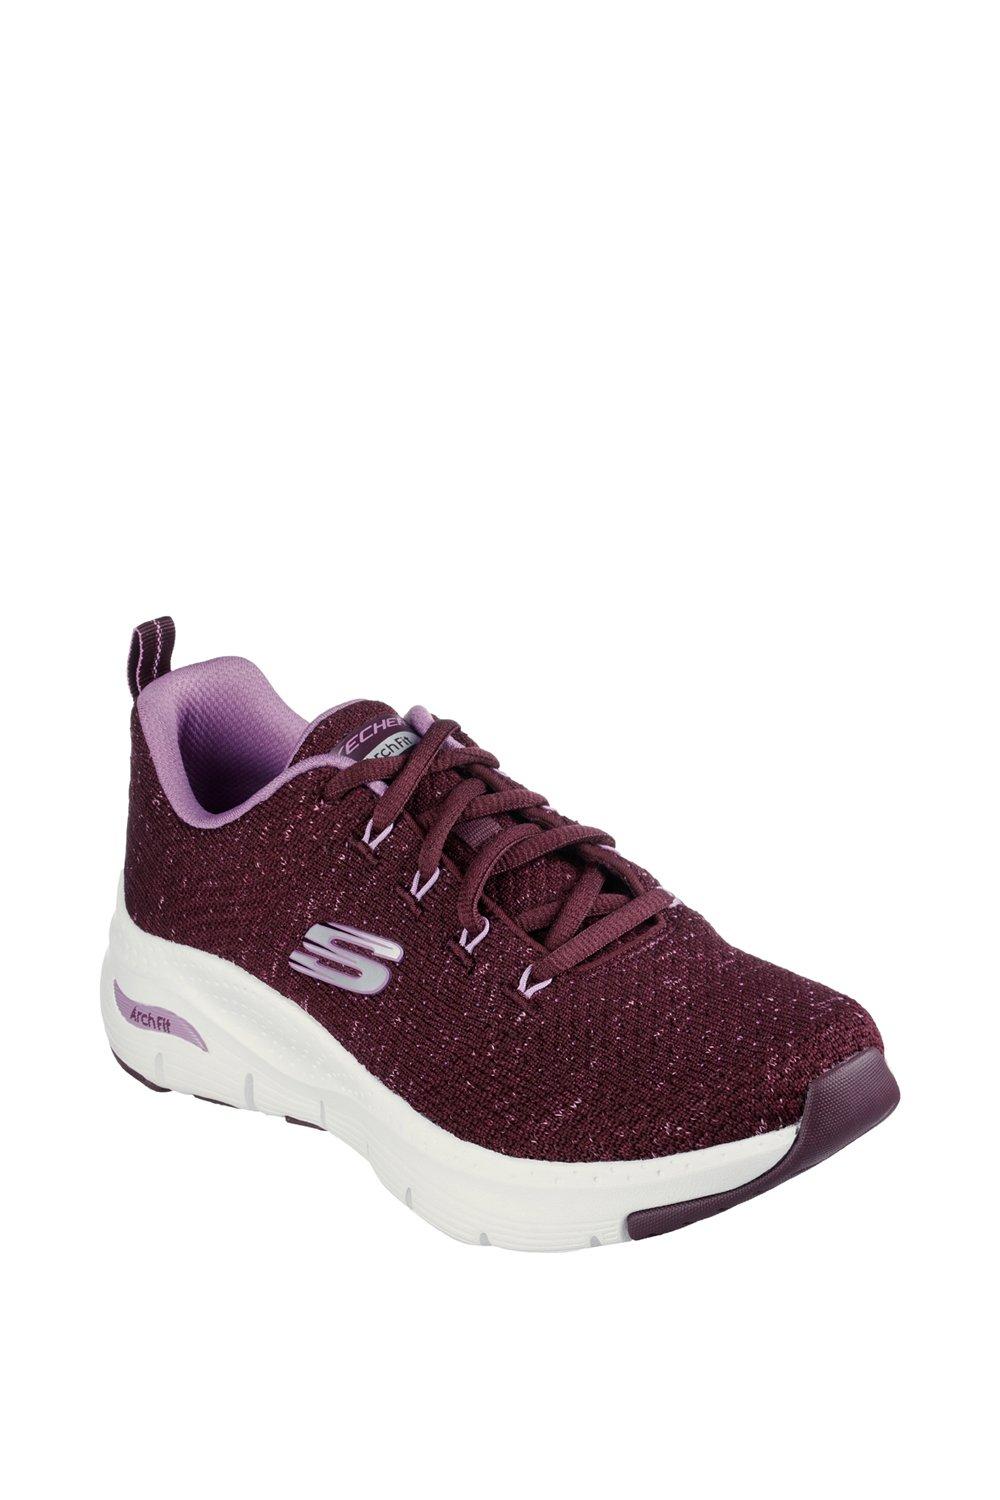 d lites arch fit Кроссовки Skechers Arch Fit - Glee For All Trainers Debenhams, фиолетовый